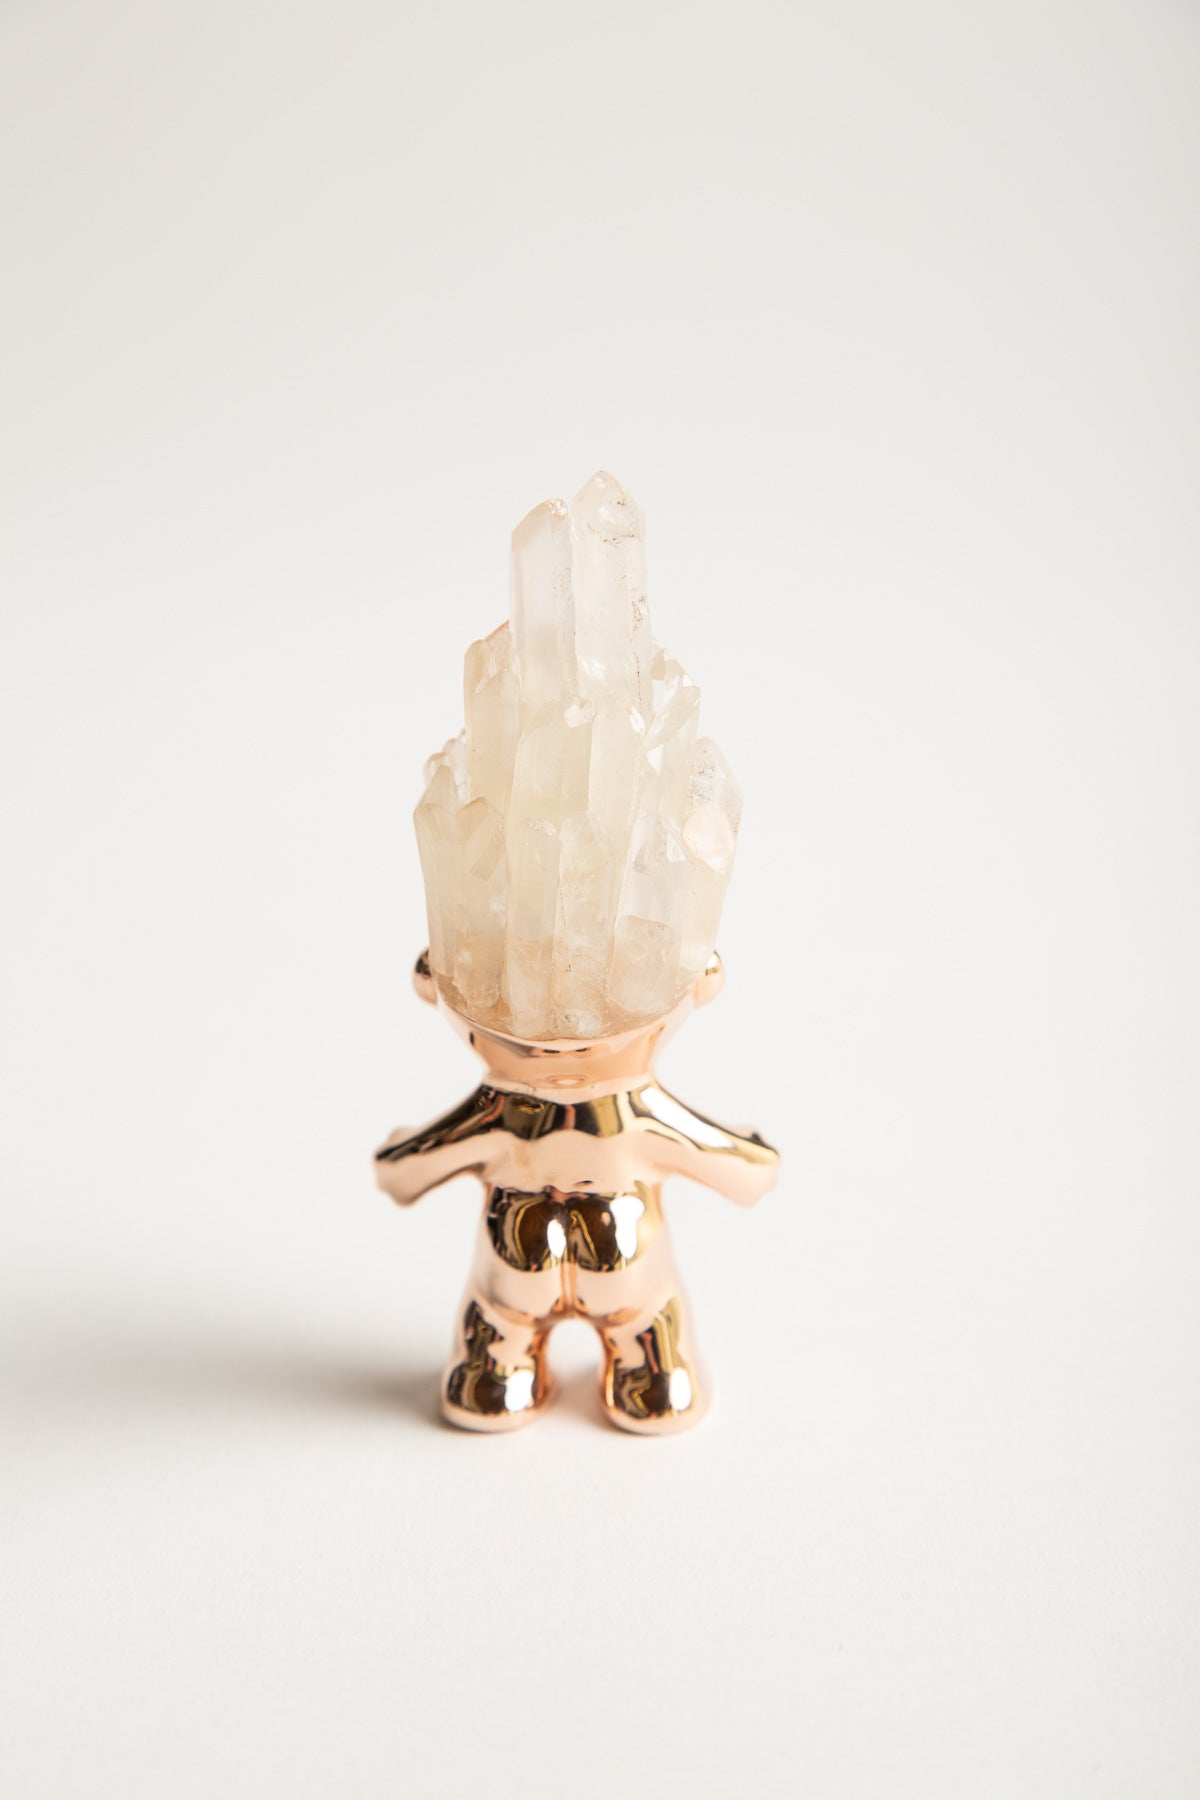 MAXFIELD PRIVATE COLLECTION | SMALL CRYSTAL TROLL